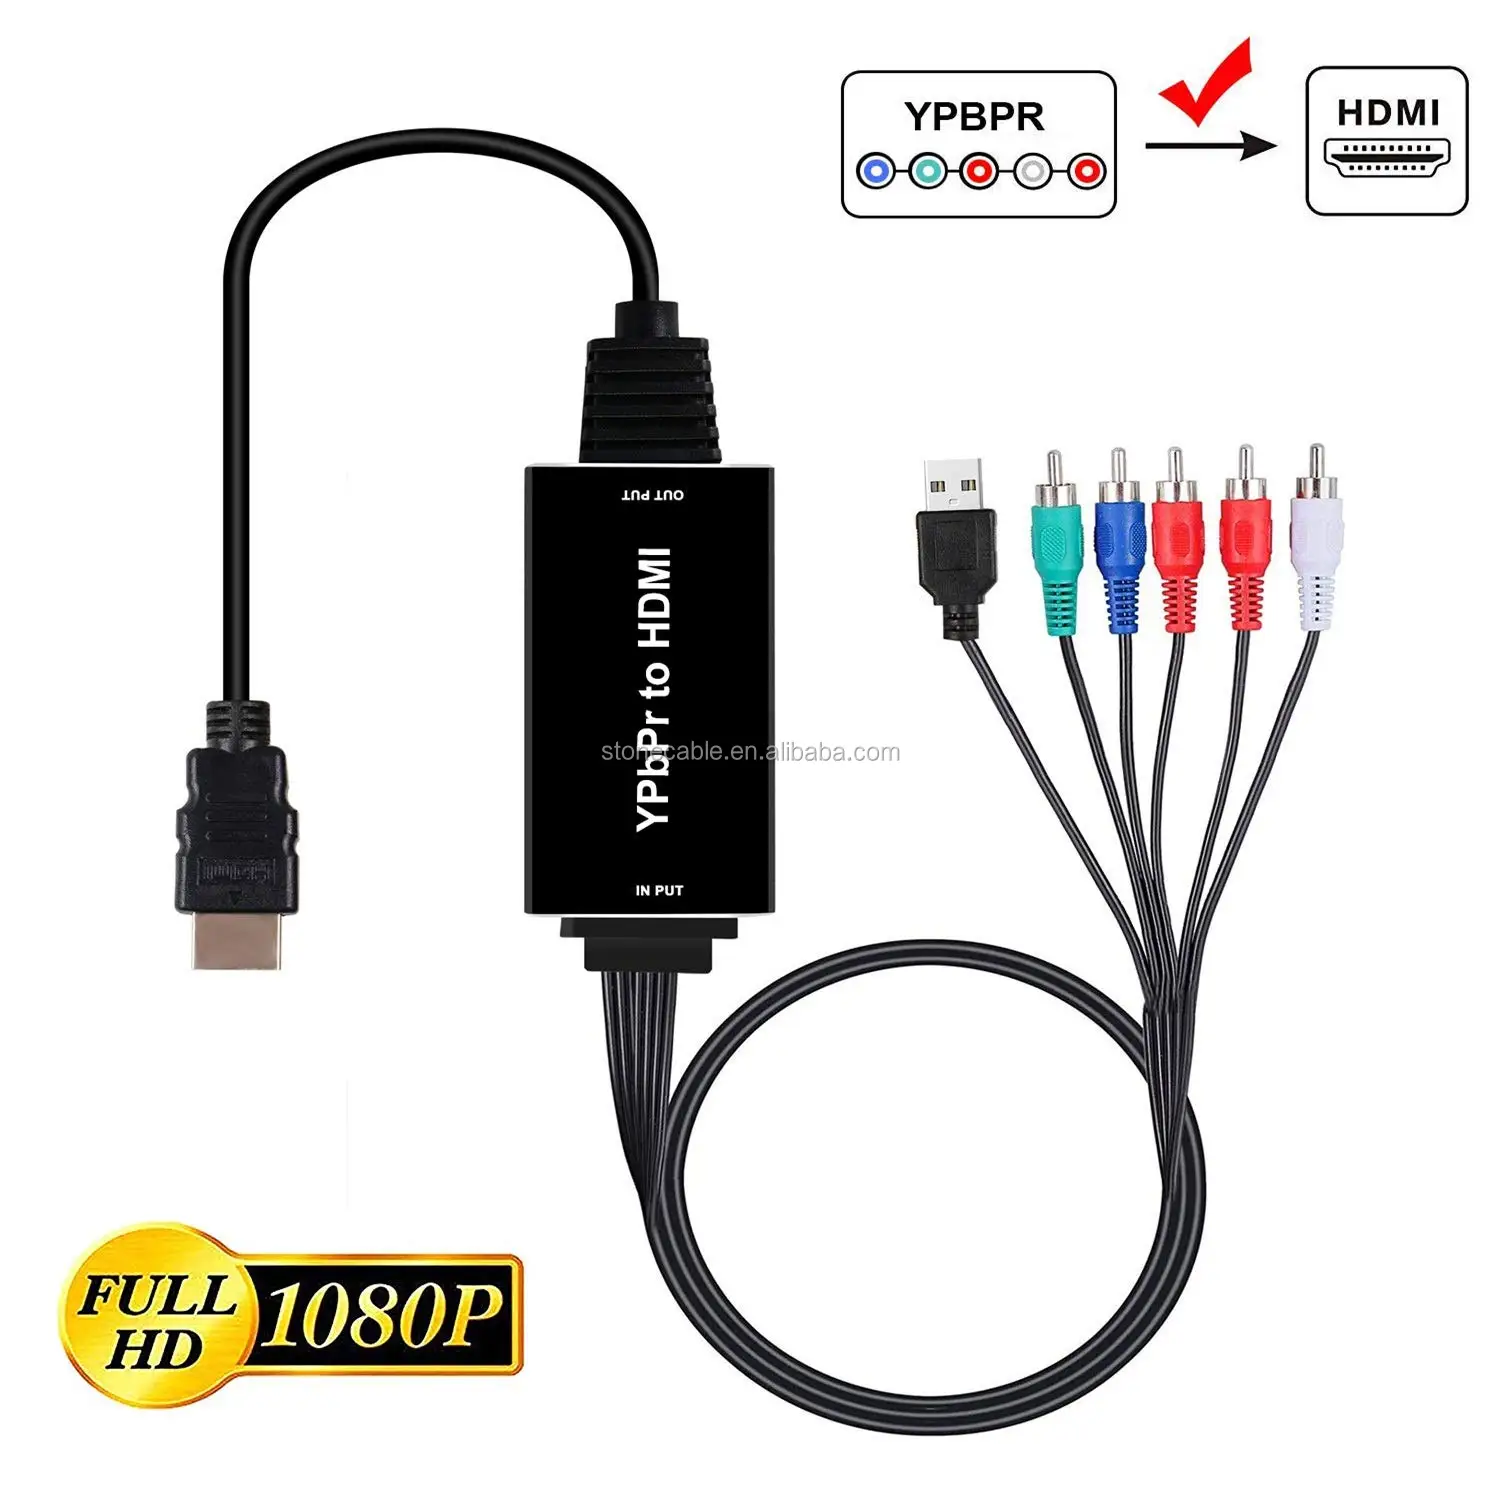 5RCA RGB Component To HDMI Converter Ypbpr R/L To HDMI Converter Video Audio Adapter For on m.alibaba.com